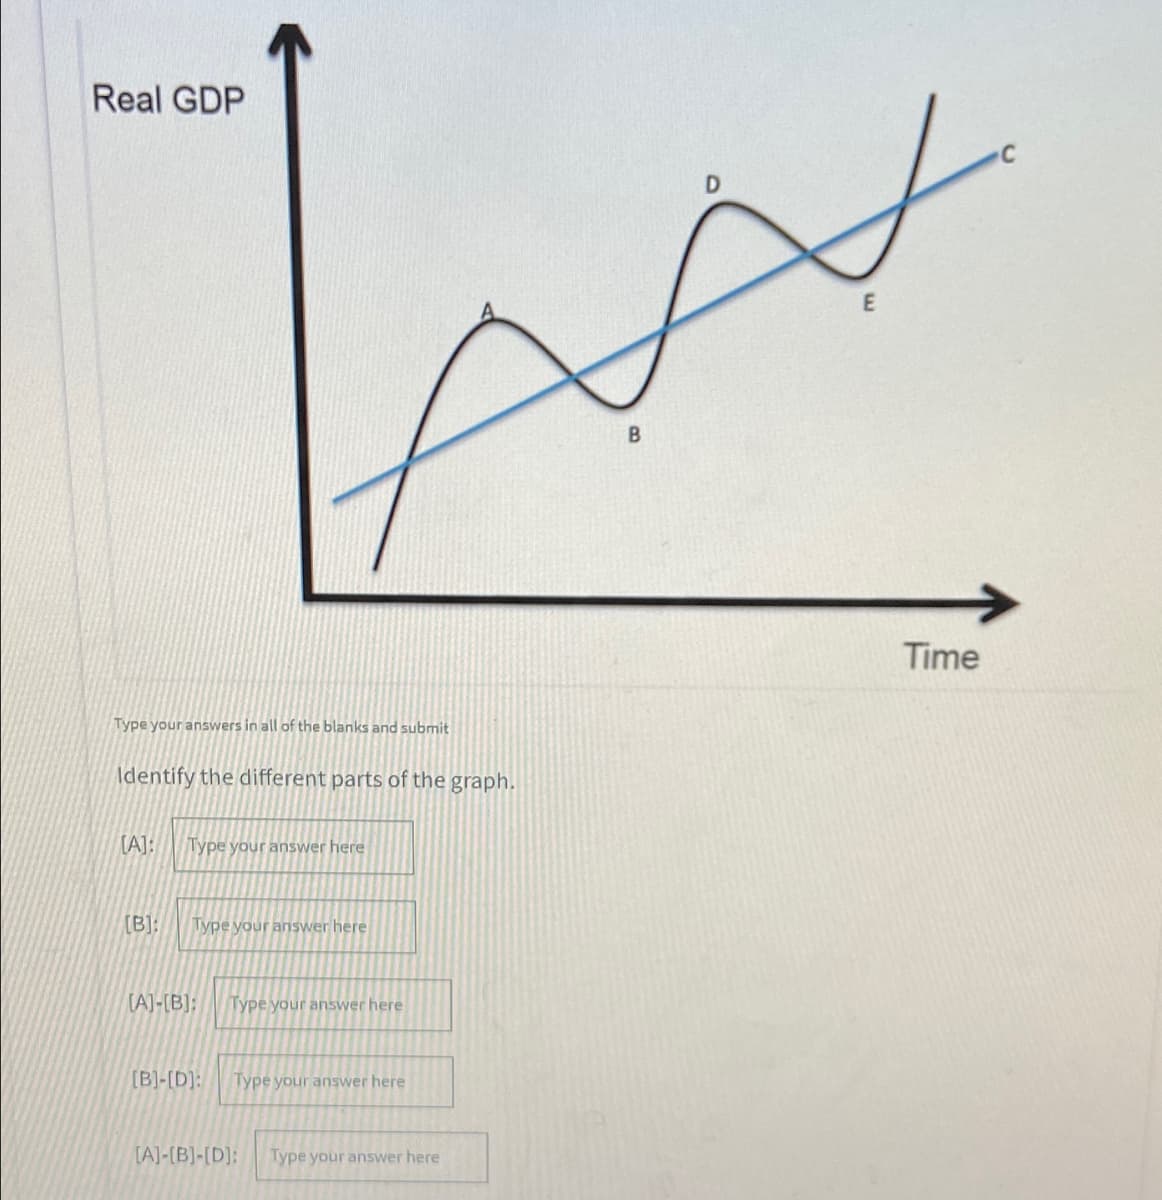 Real GDP
D
Time
Type your answers in all of the blanks and submit
Identify the different parts of the graph.
(A]:
Type your answer here
[B]:
Type your answer here
(A]-[B]:
Type your answer here
[B]-[D]:
Type your answer here
[A]-[B]-[D]:
Type your answer here
